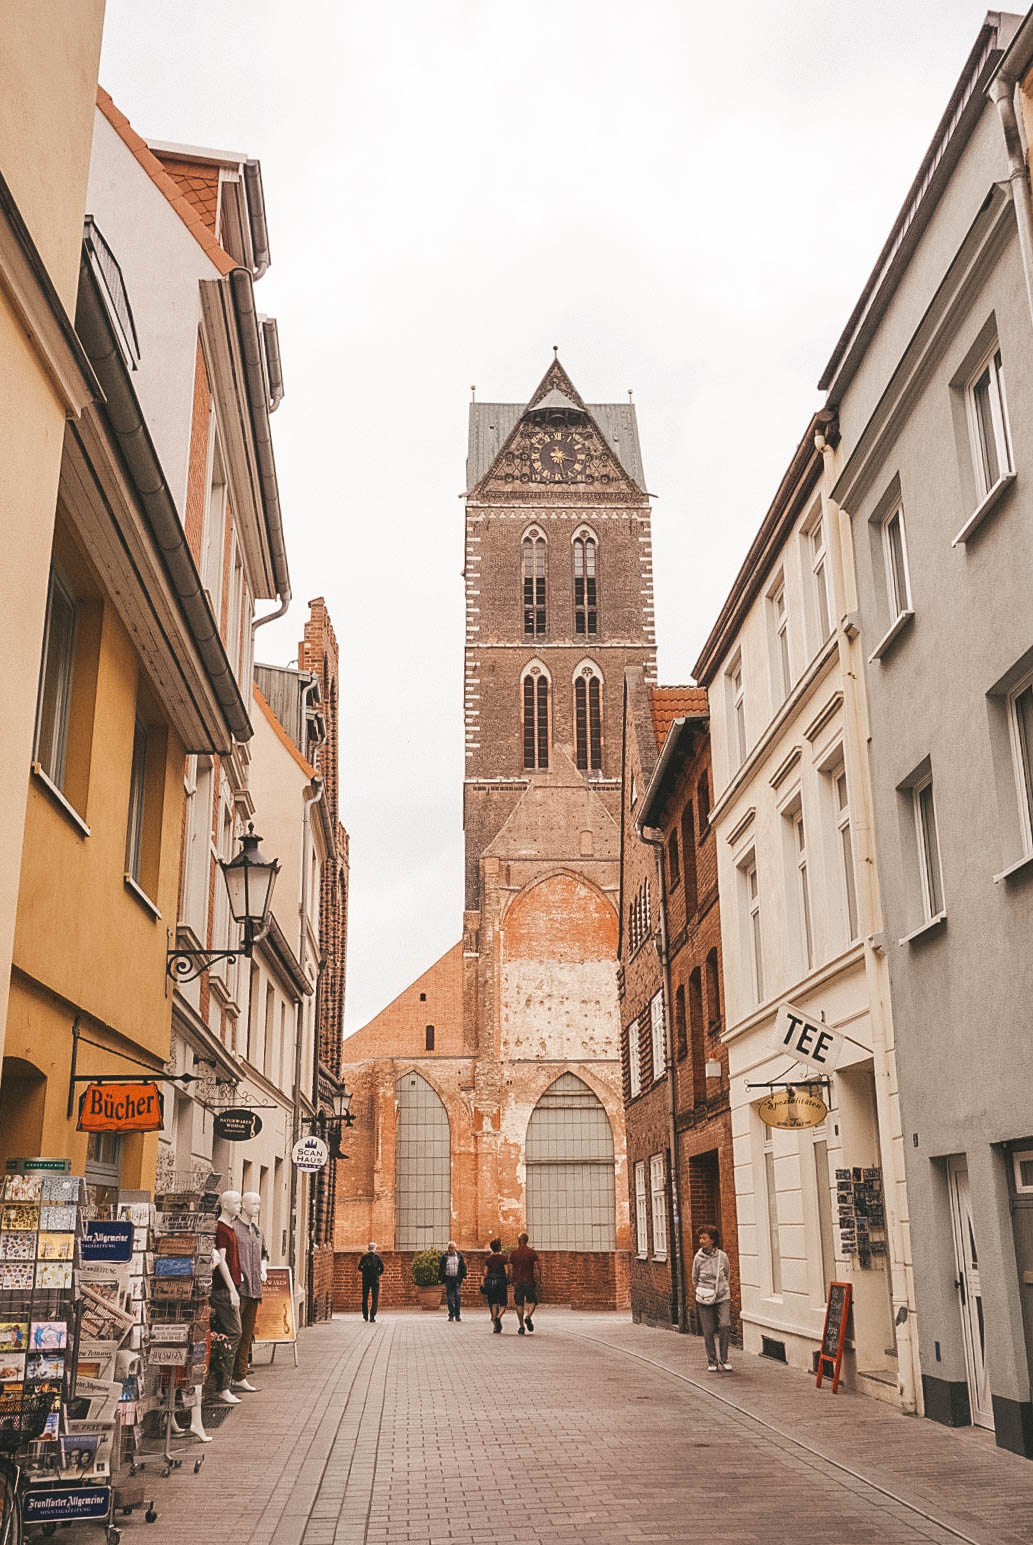 The bell tower of the Marienkirche, at the end of a street in Wismar.